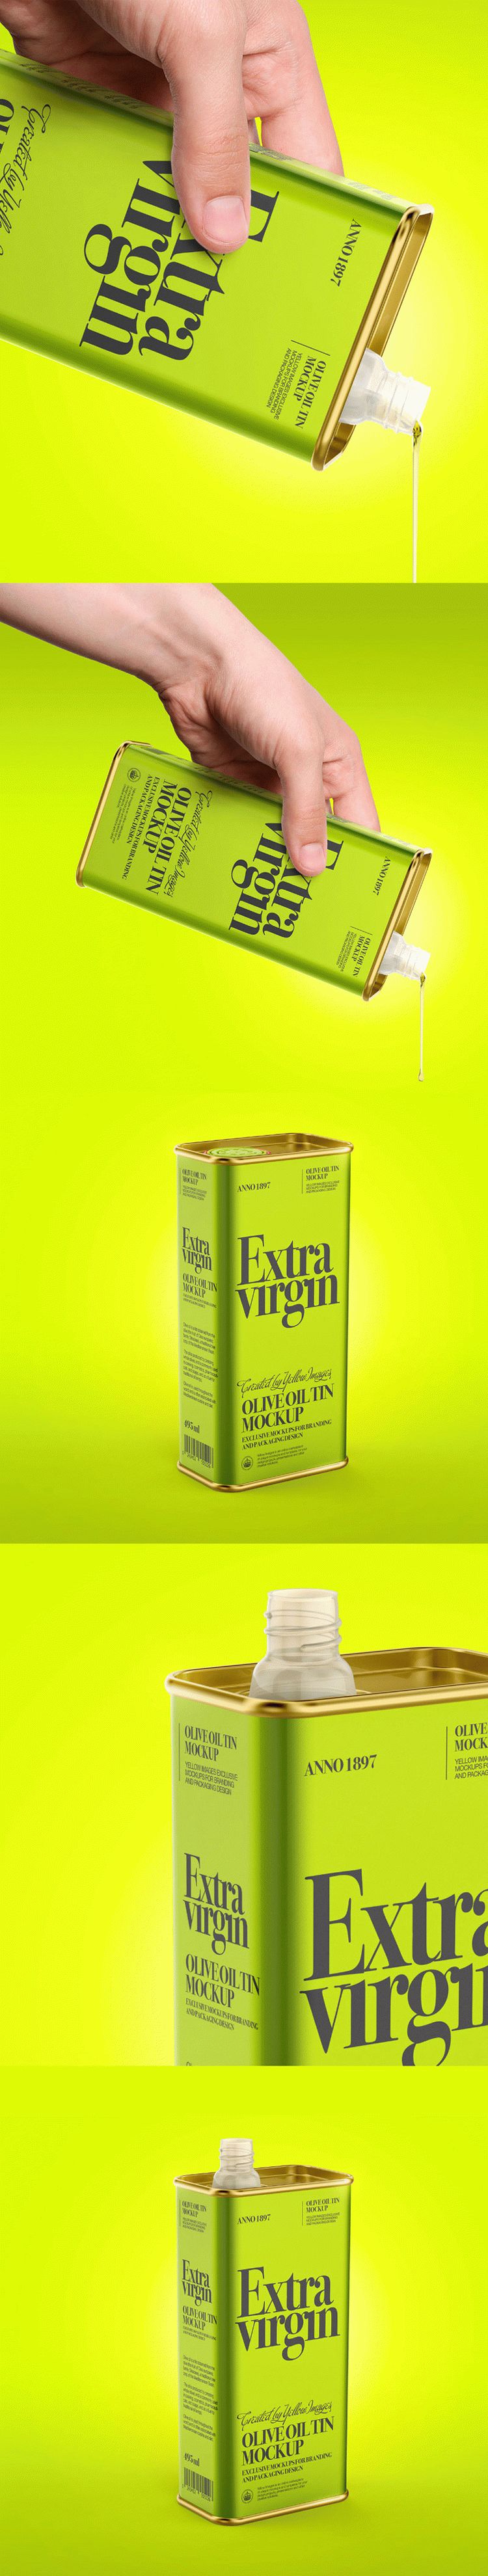 Download Free Olive Oil Tin Can Mockup | Download